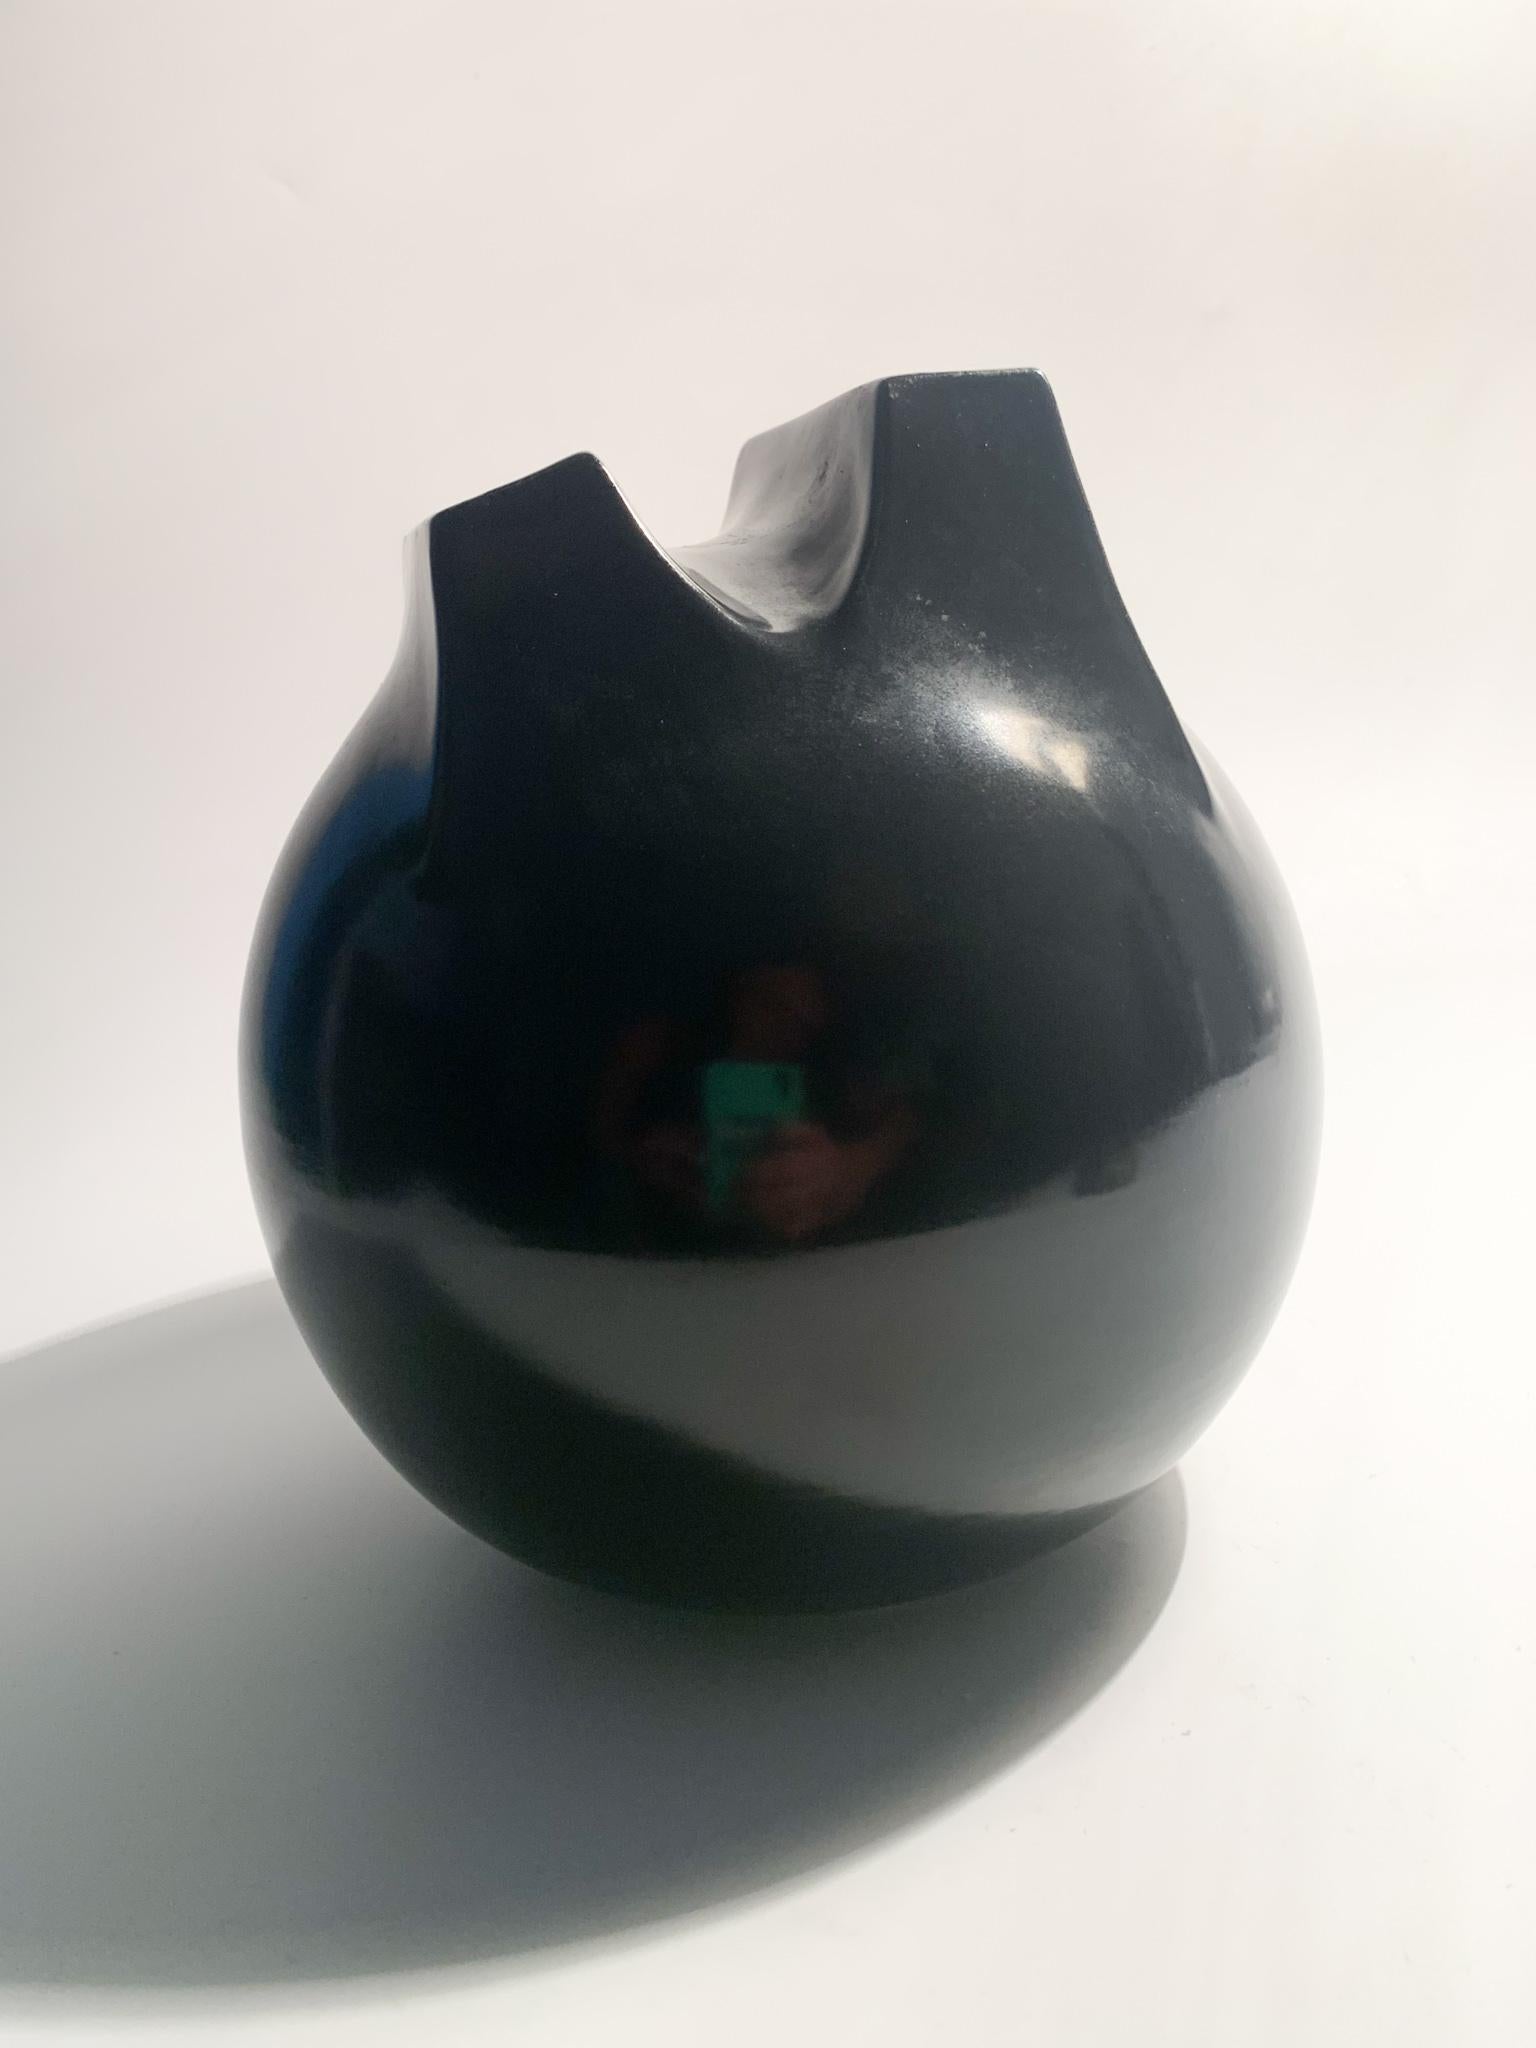 Whistle Ceramic Vase with Double Mouth by Franco Bucci from the 1970s For Sale 1